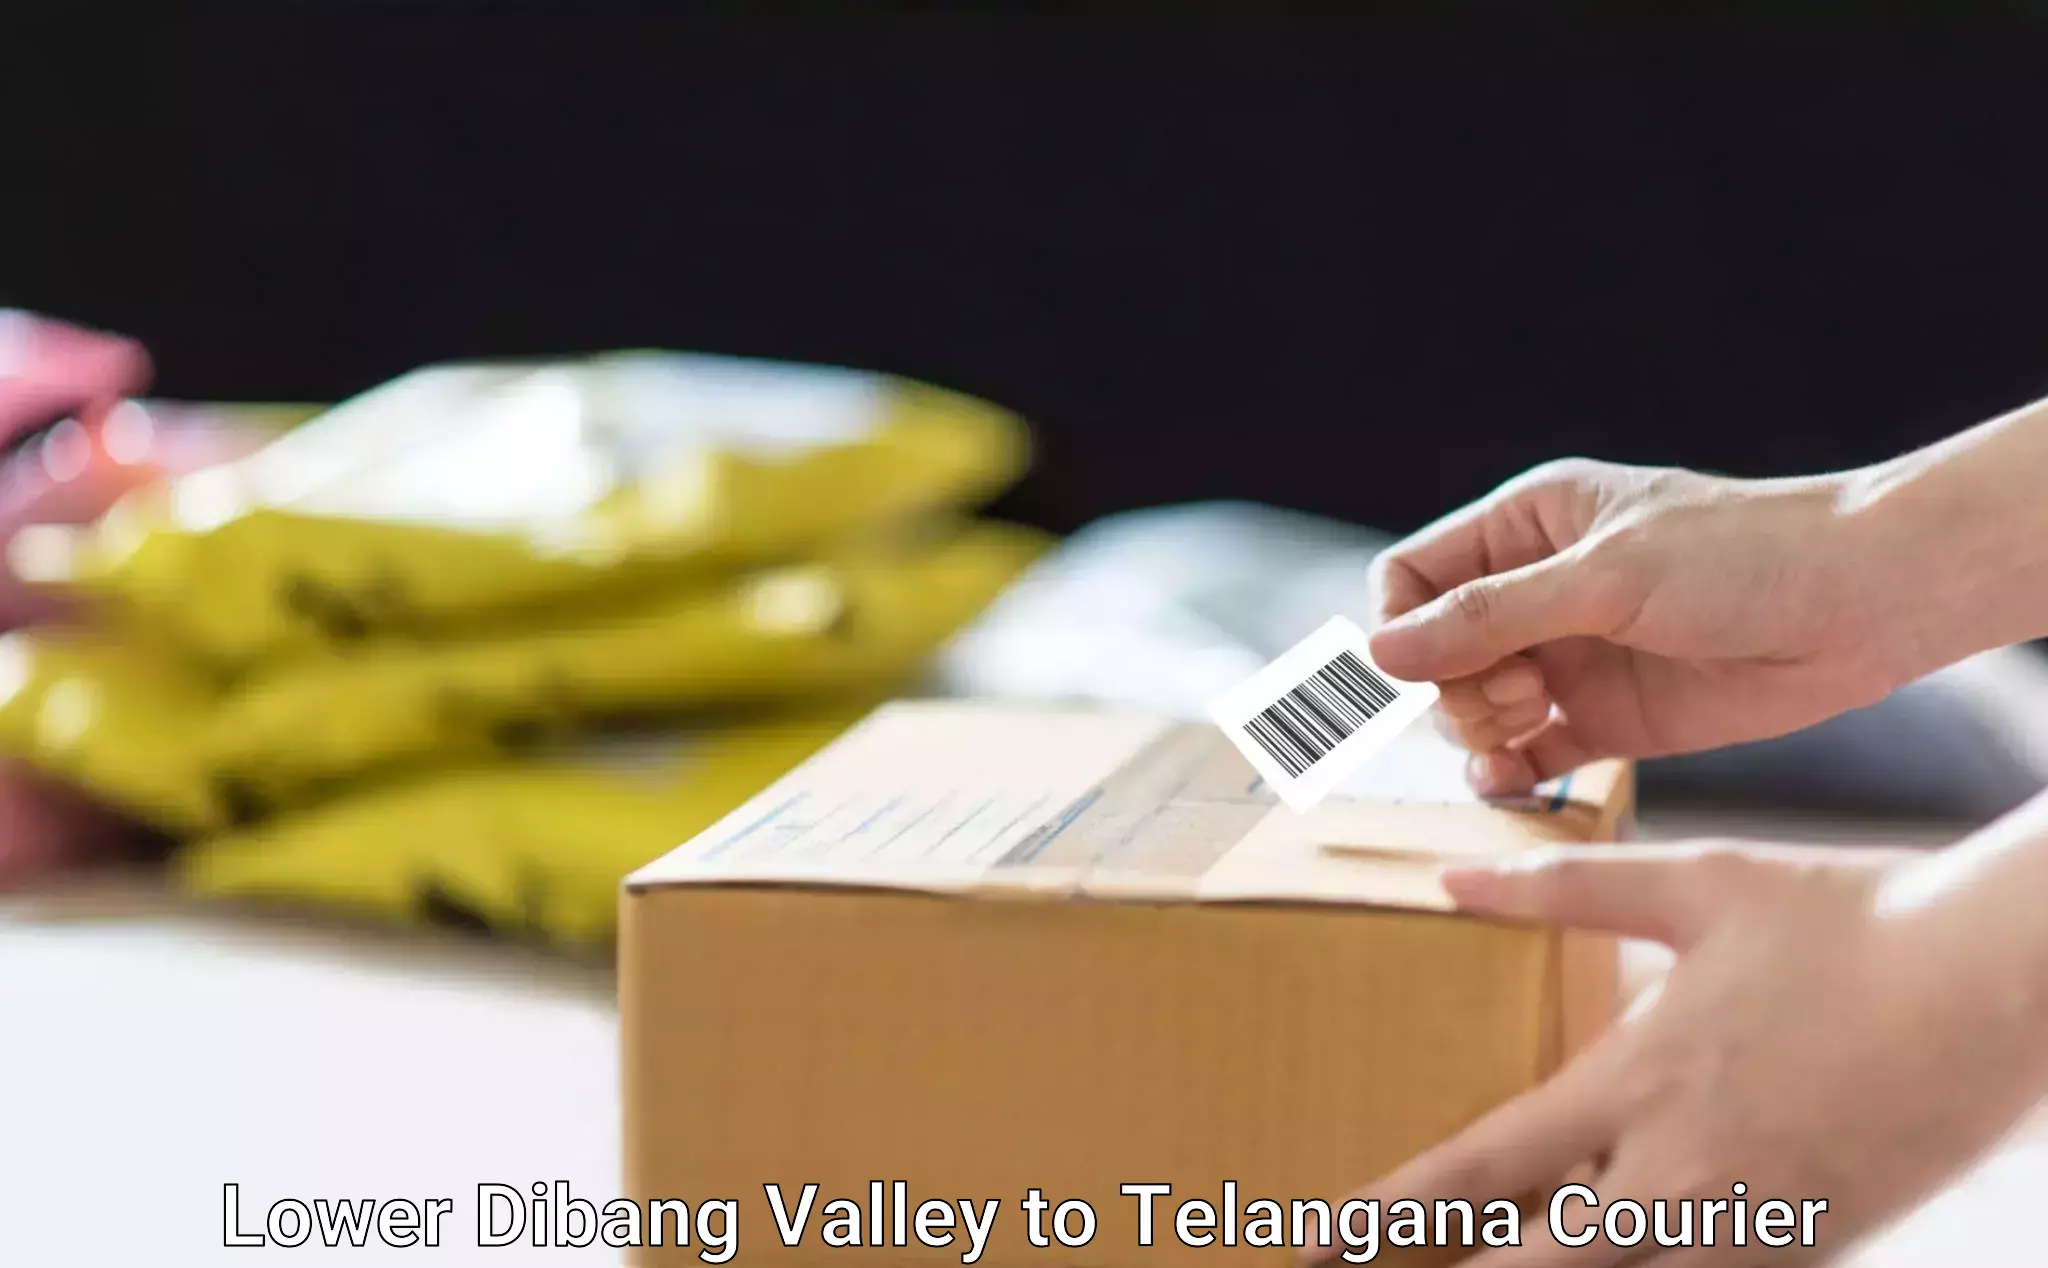 E-commerce fulfillment in Lower Dibang Valley to Pathipaka